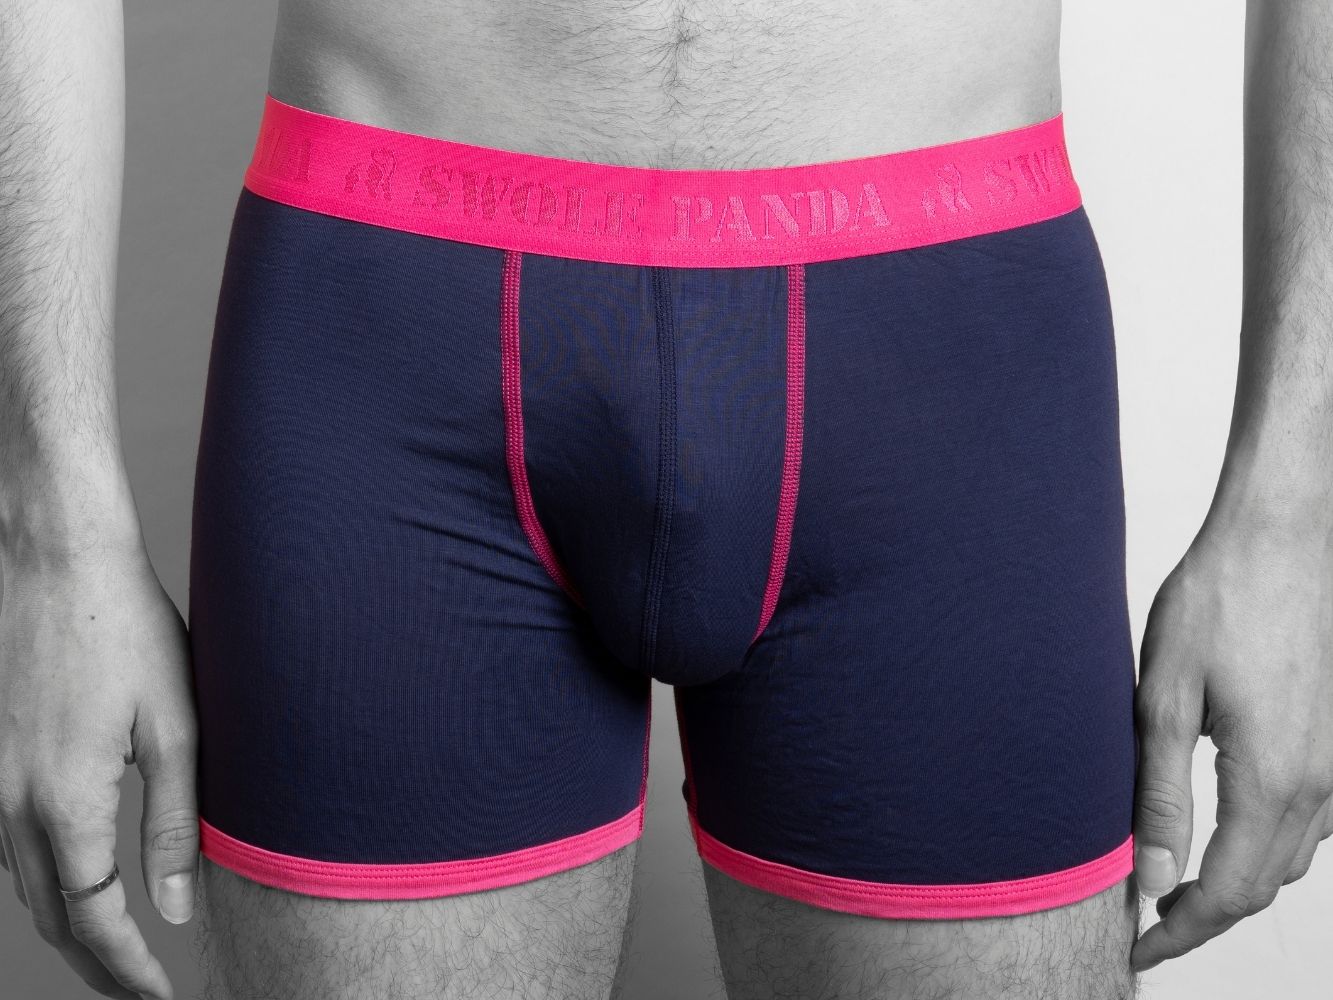 Bamboo Boxers 2 Pack - Pink / Navy & Sharks